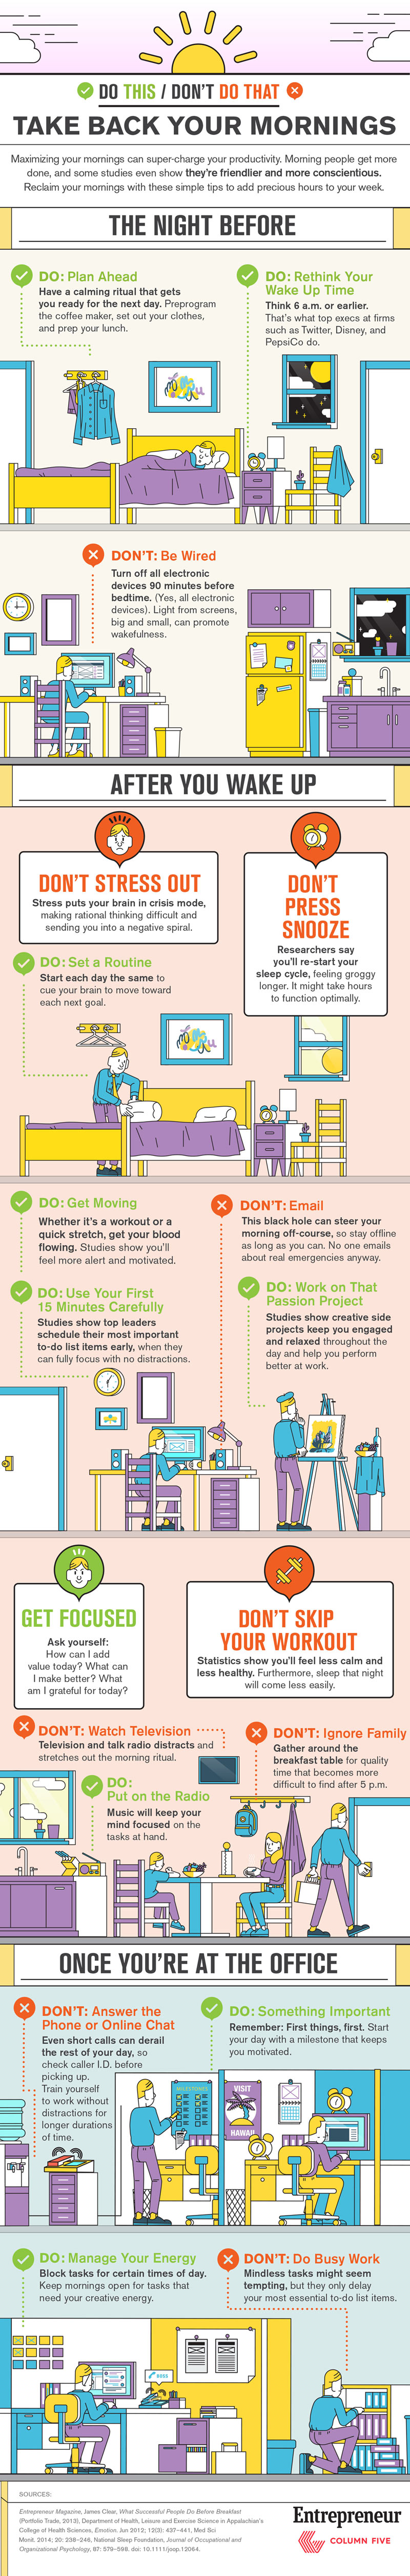 19 tips for becoming a morning person.